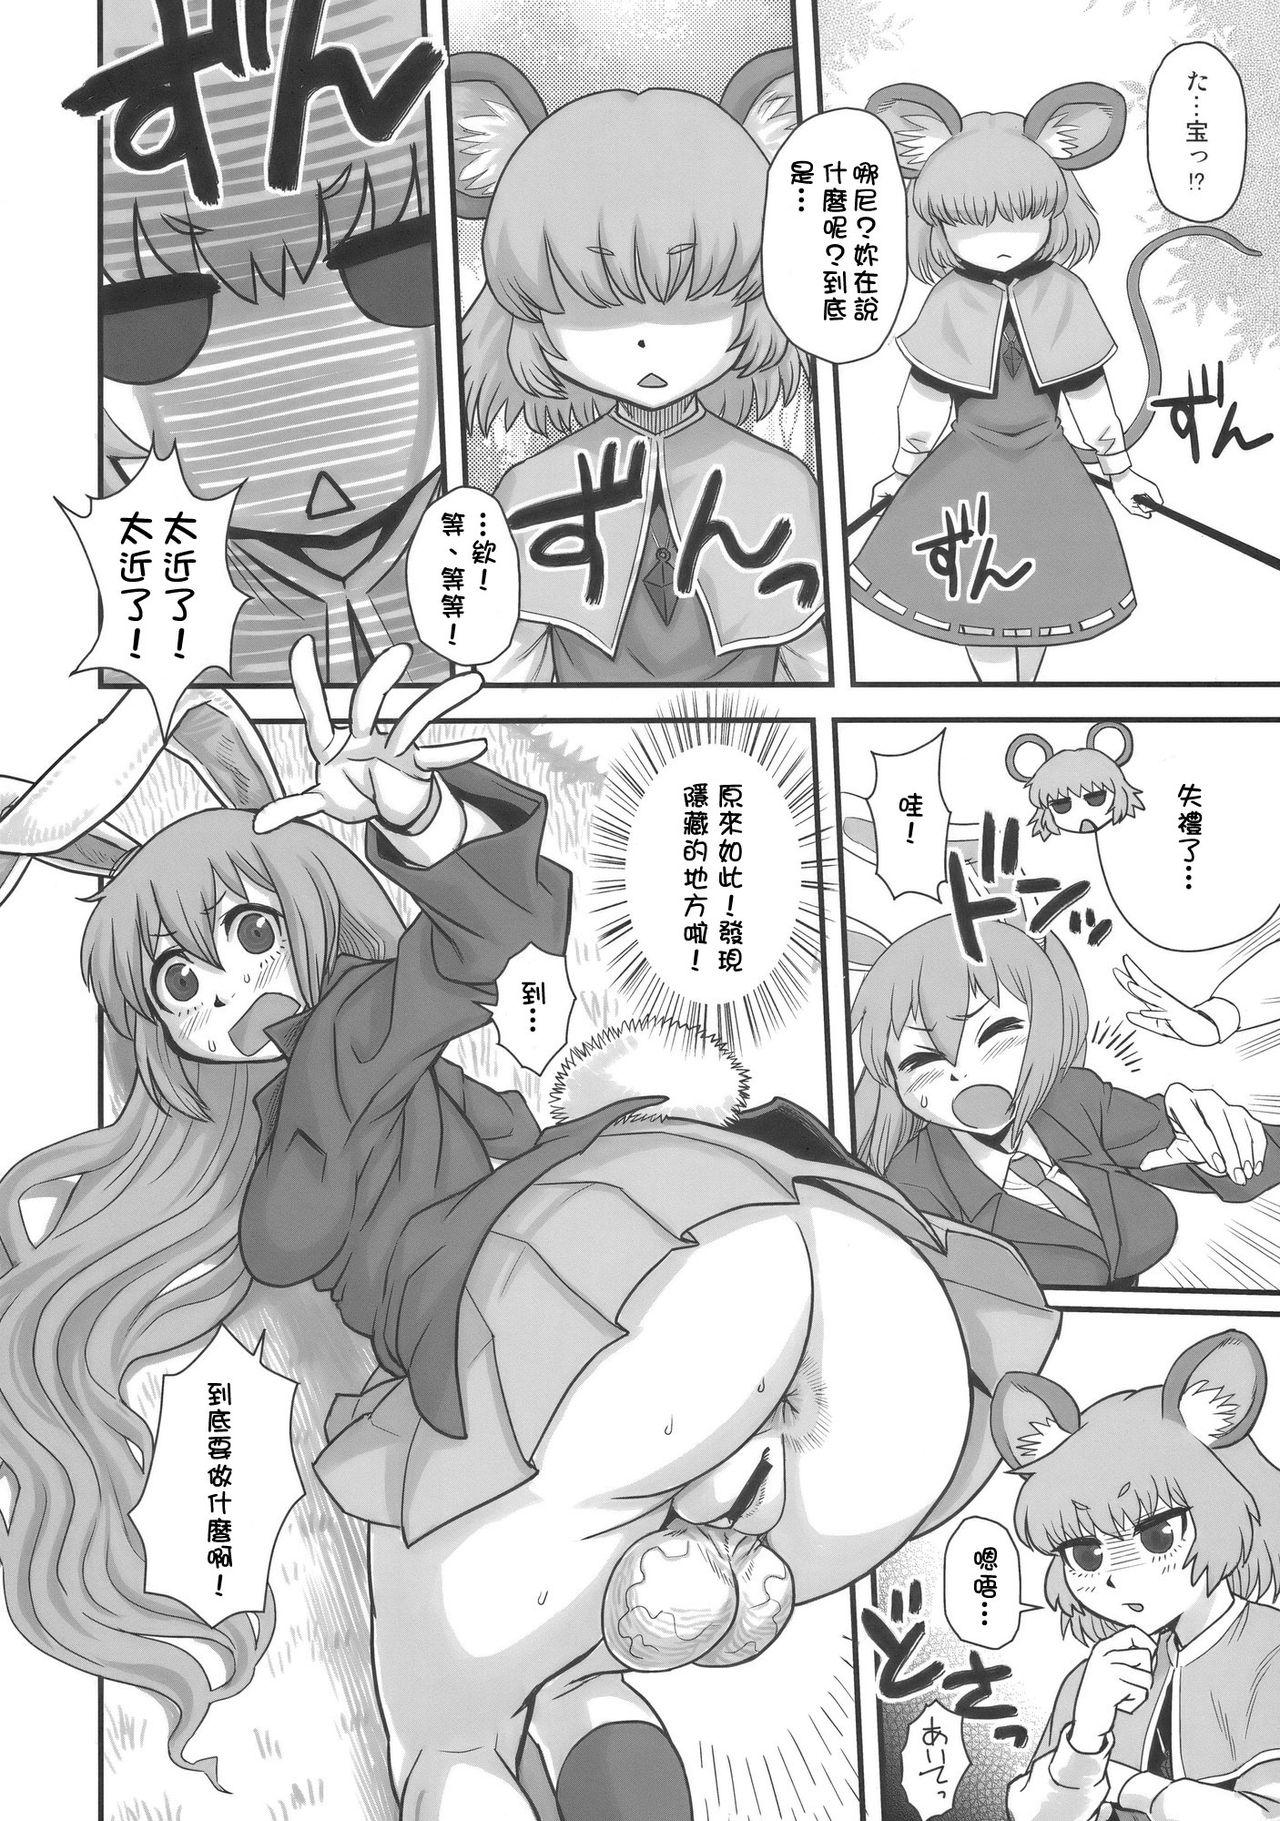 Orgasmo Lunatic Udon - Touhou project Sapphic Erotica - Page 6